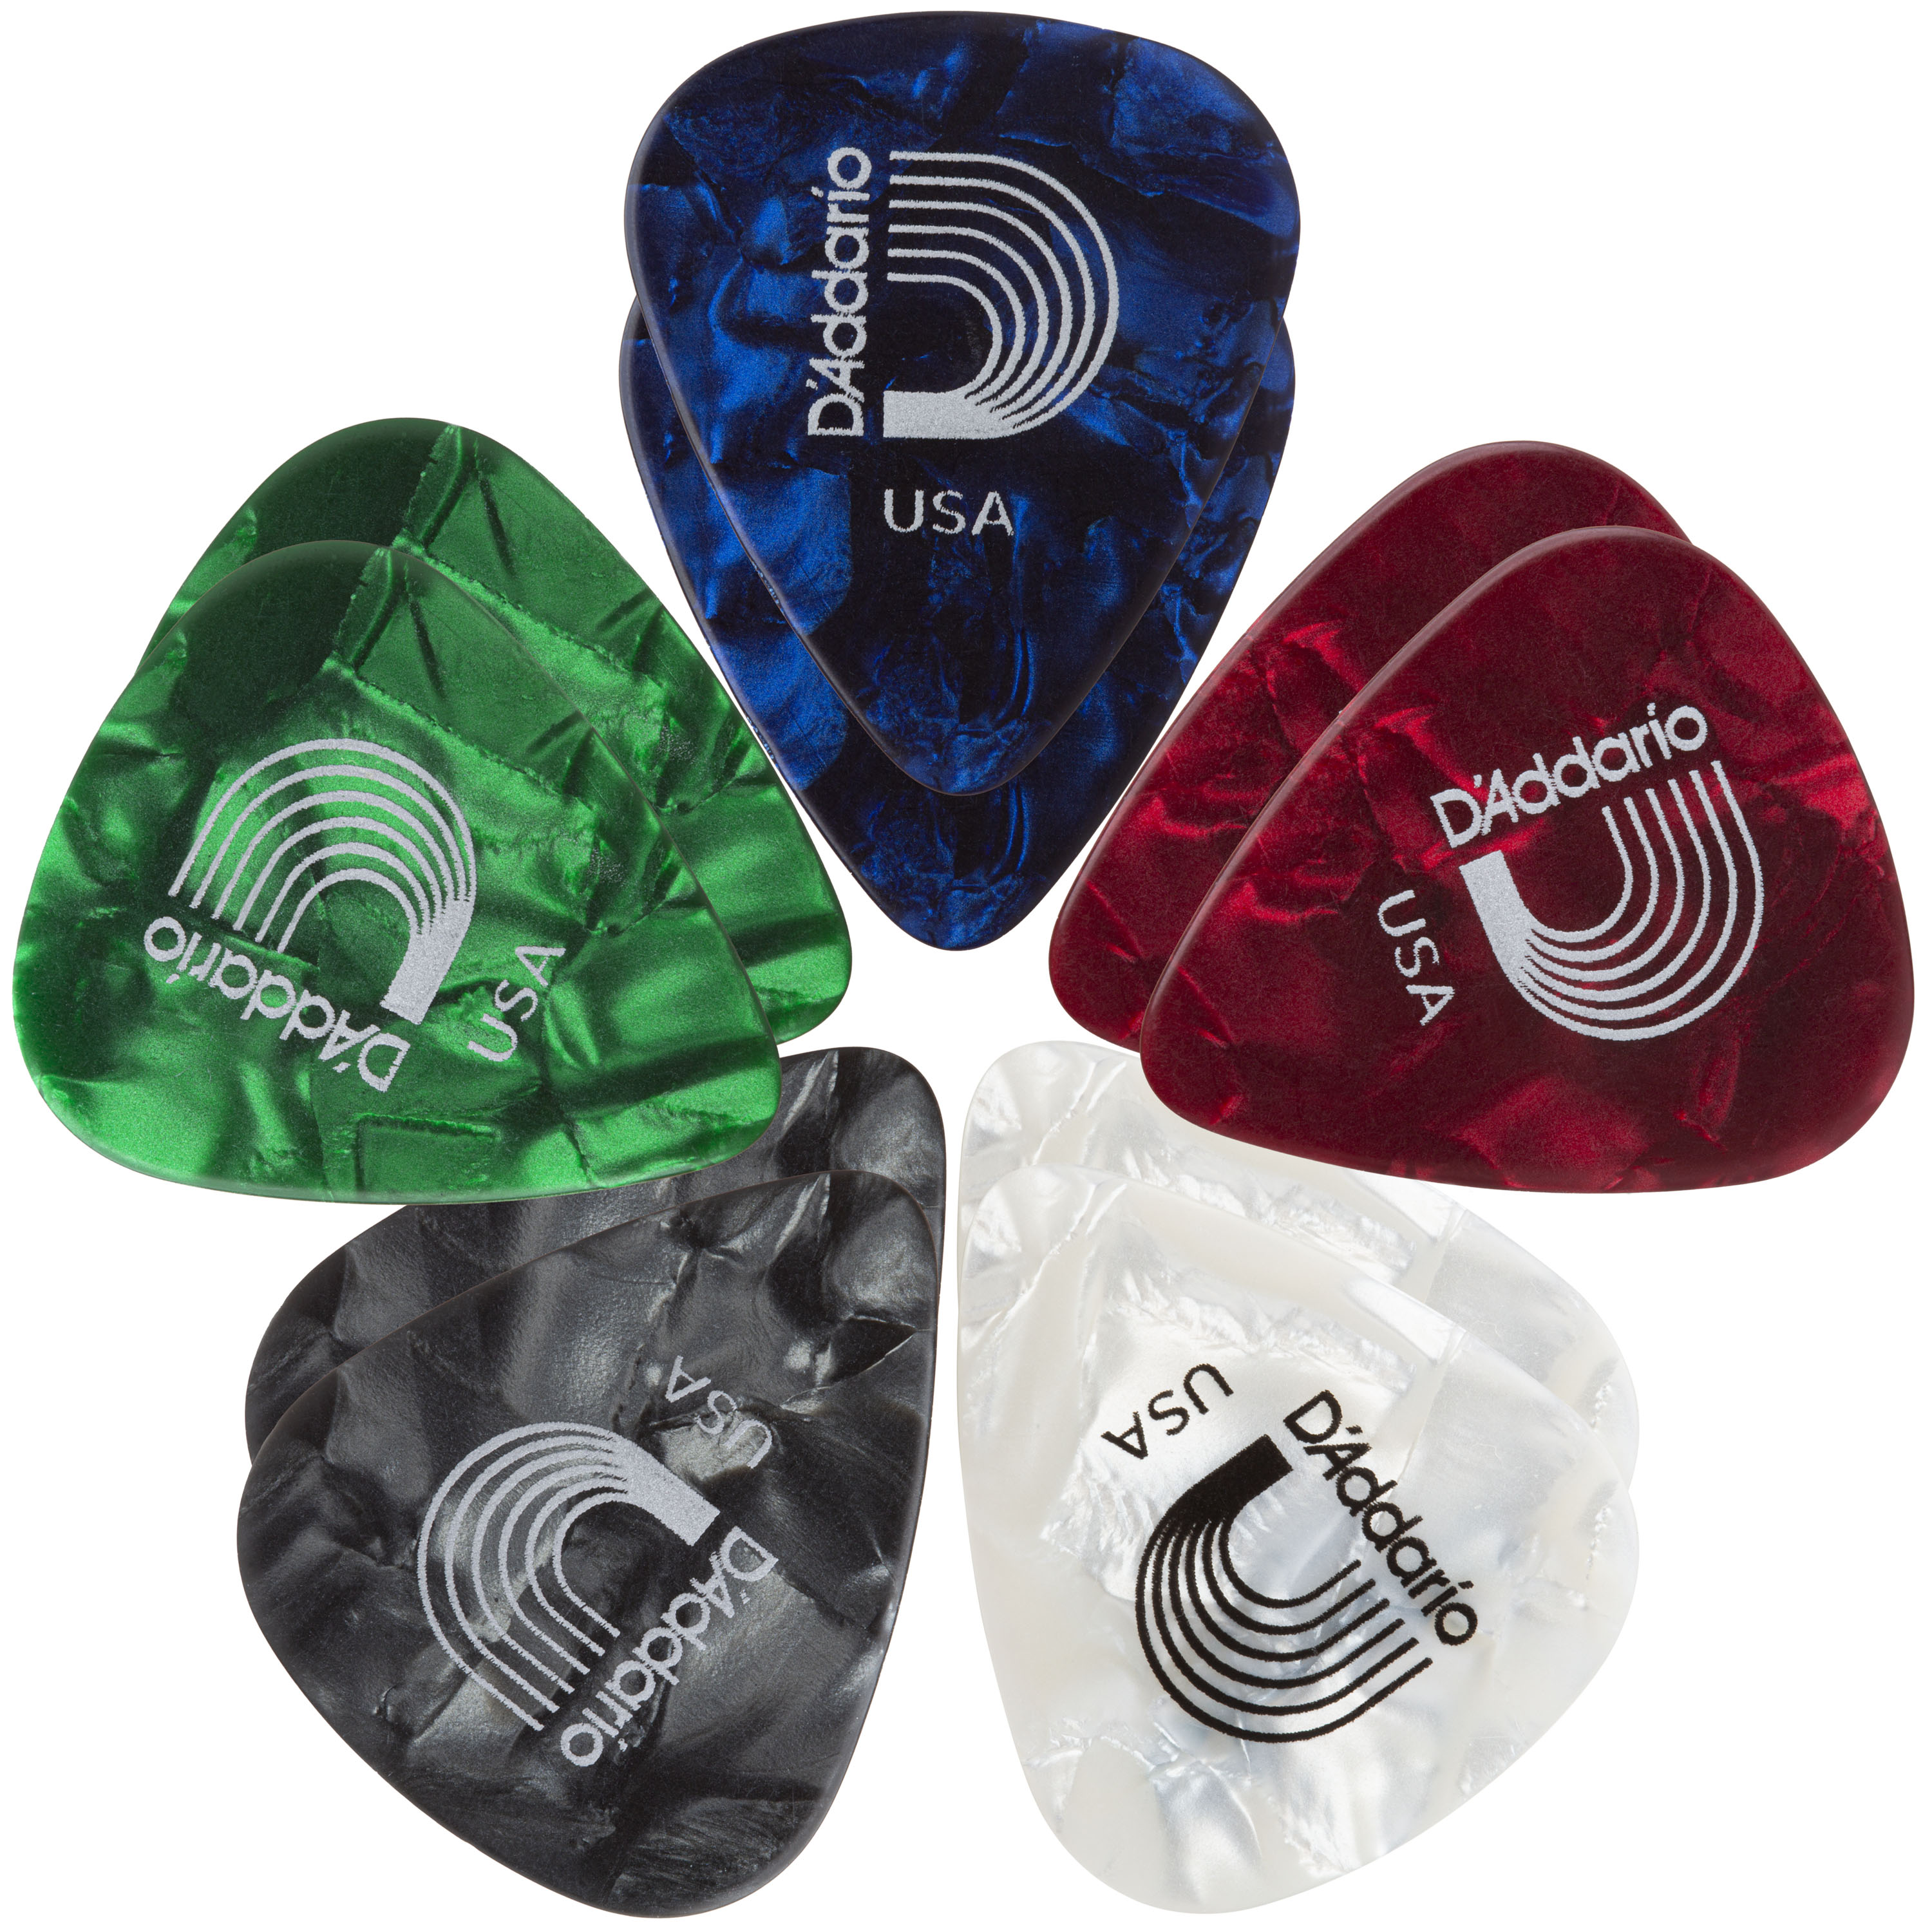 D'Addario Planet Waves Classic Pearl Celluloid Assortment Pack